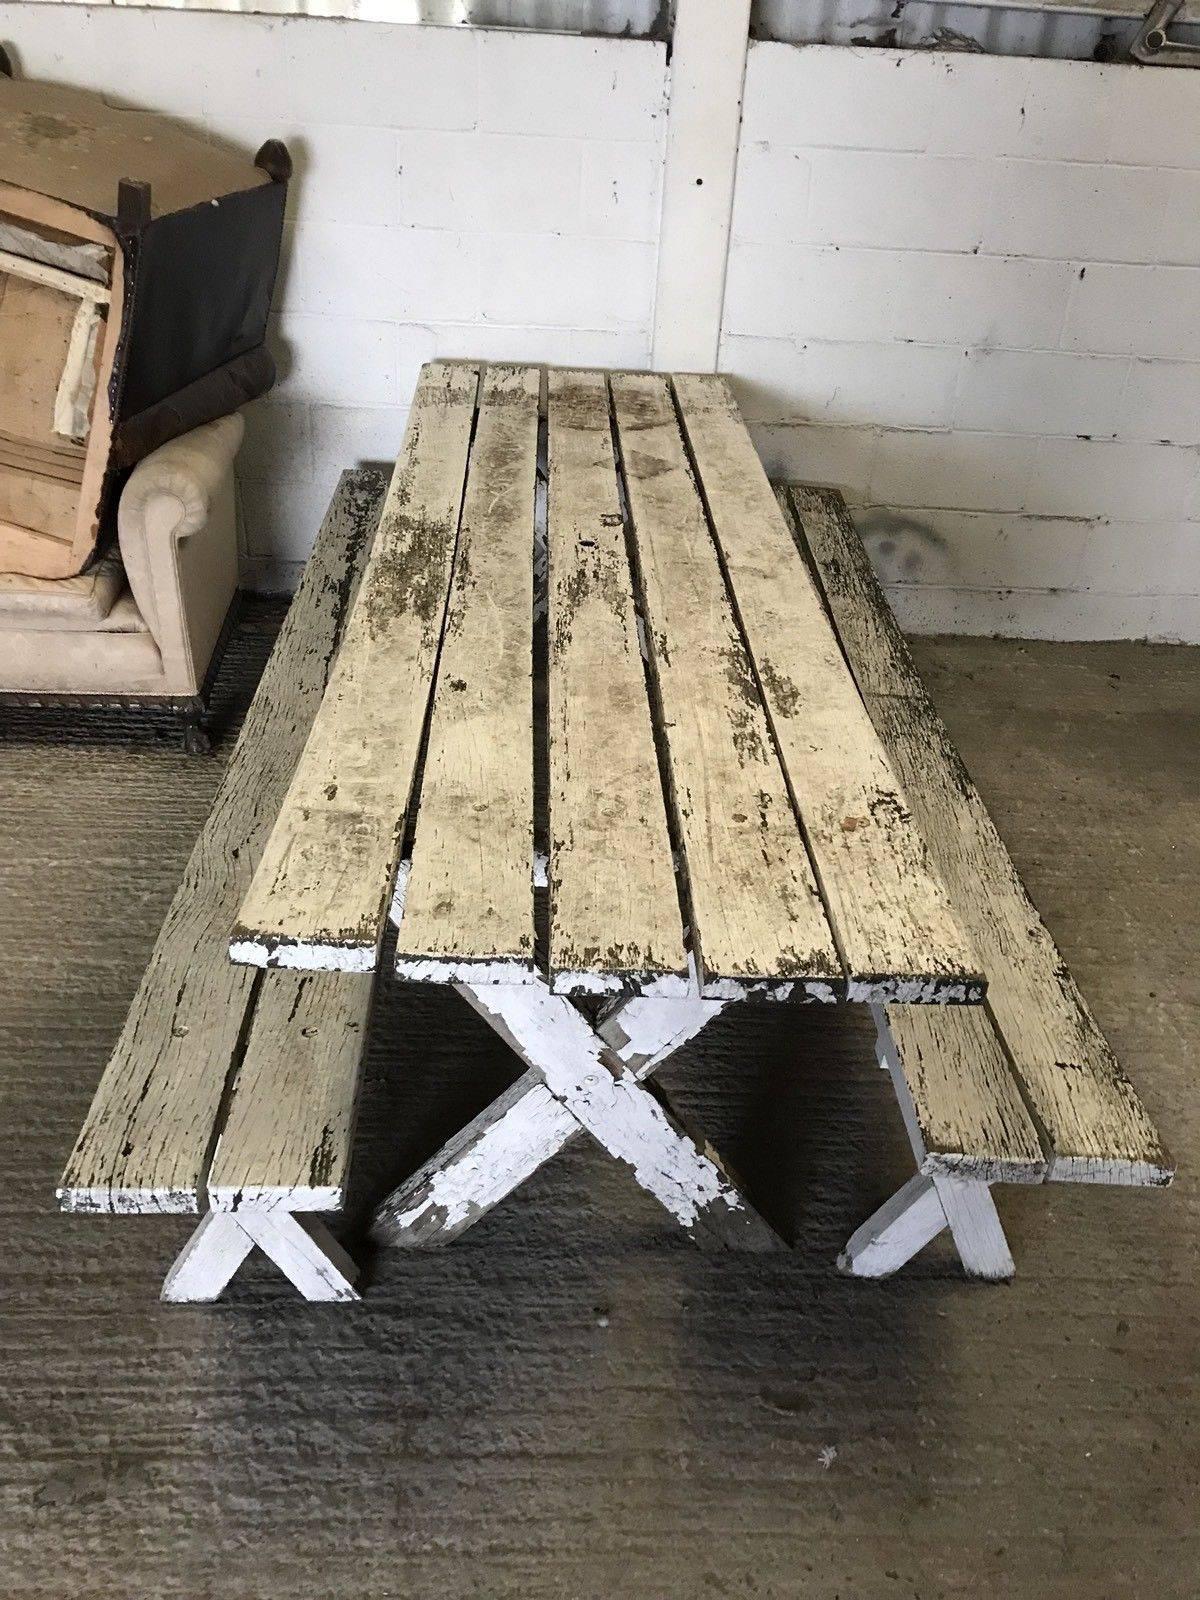 This is a beautiful French table and benches in original condition. Fantastic age and patina, second to none! The top oozes patina and has lovely age to it. All the paint is original and is the talking point of this fabulous table. The benches are